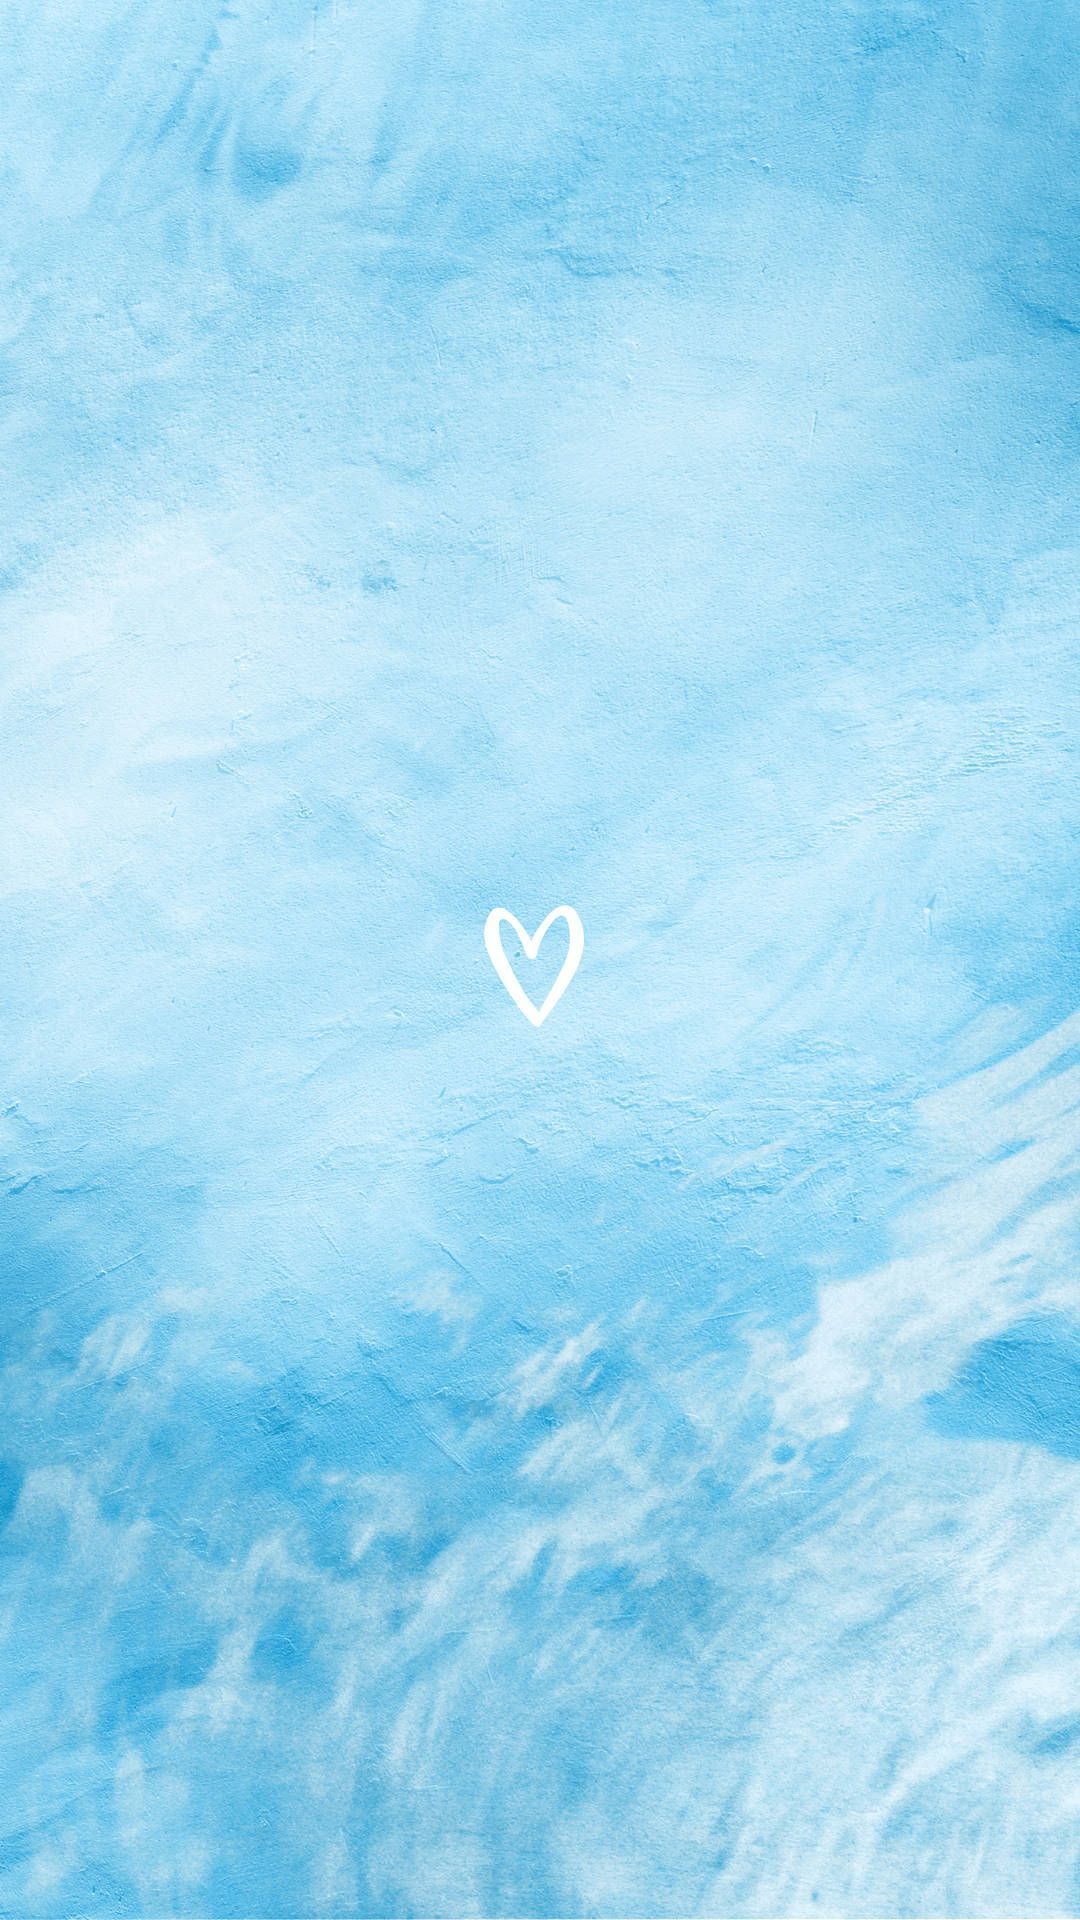 IPhone wallpaper of a blue sky background with a white heart in the middle - Light blue, blue, pastel blue